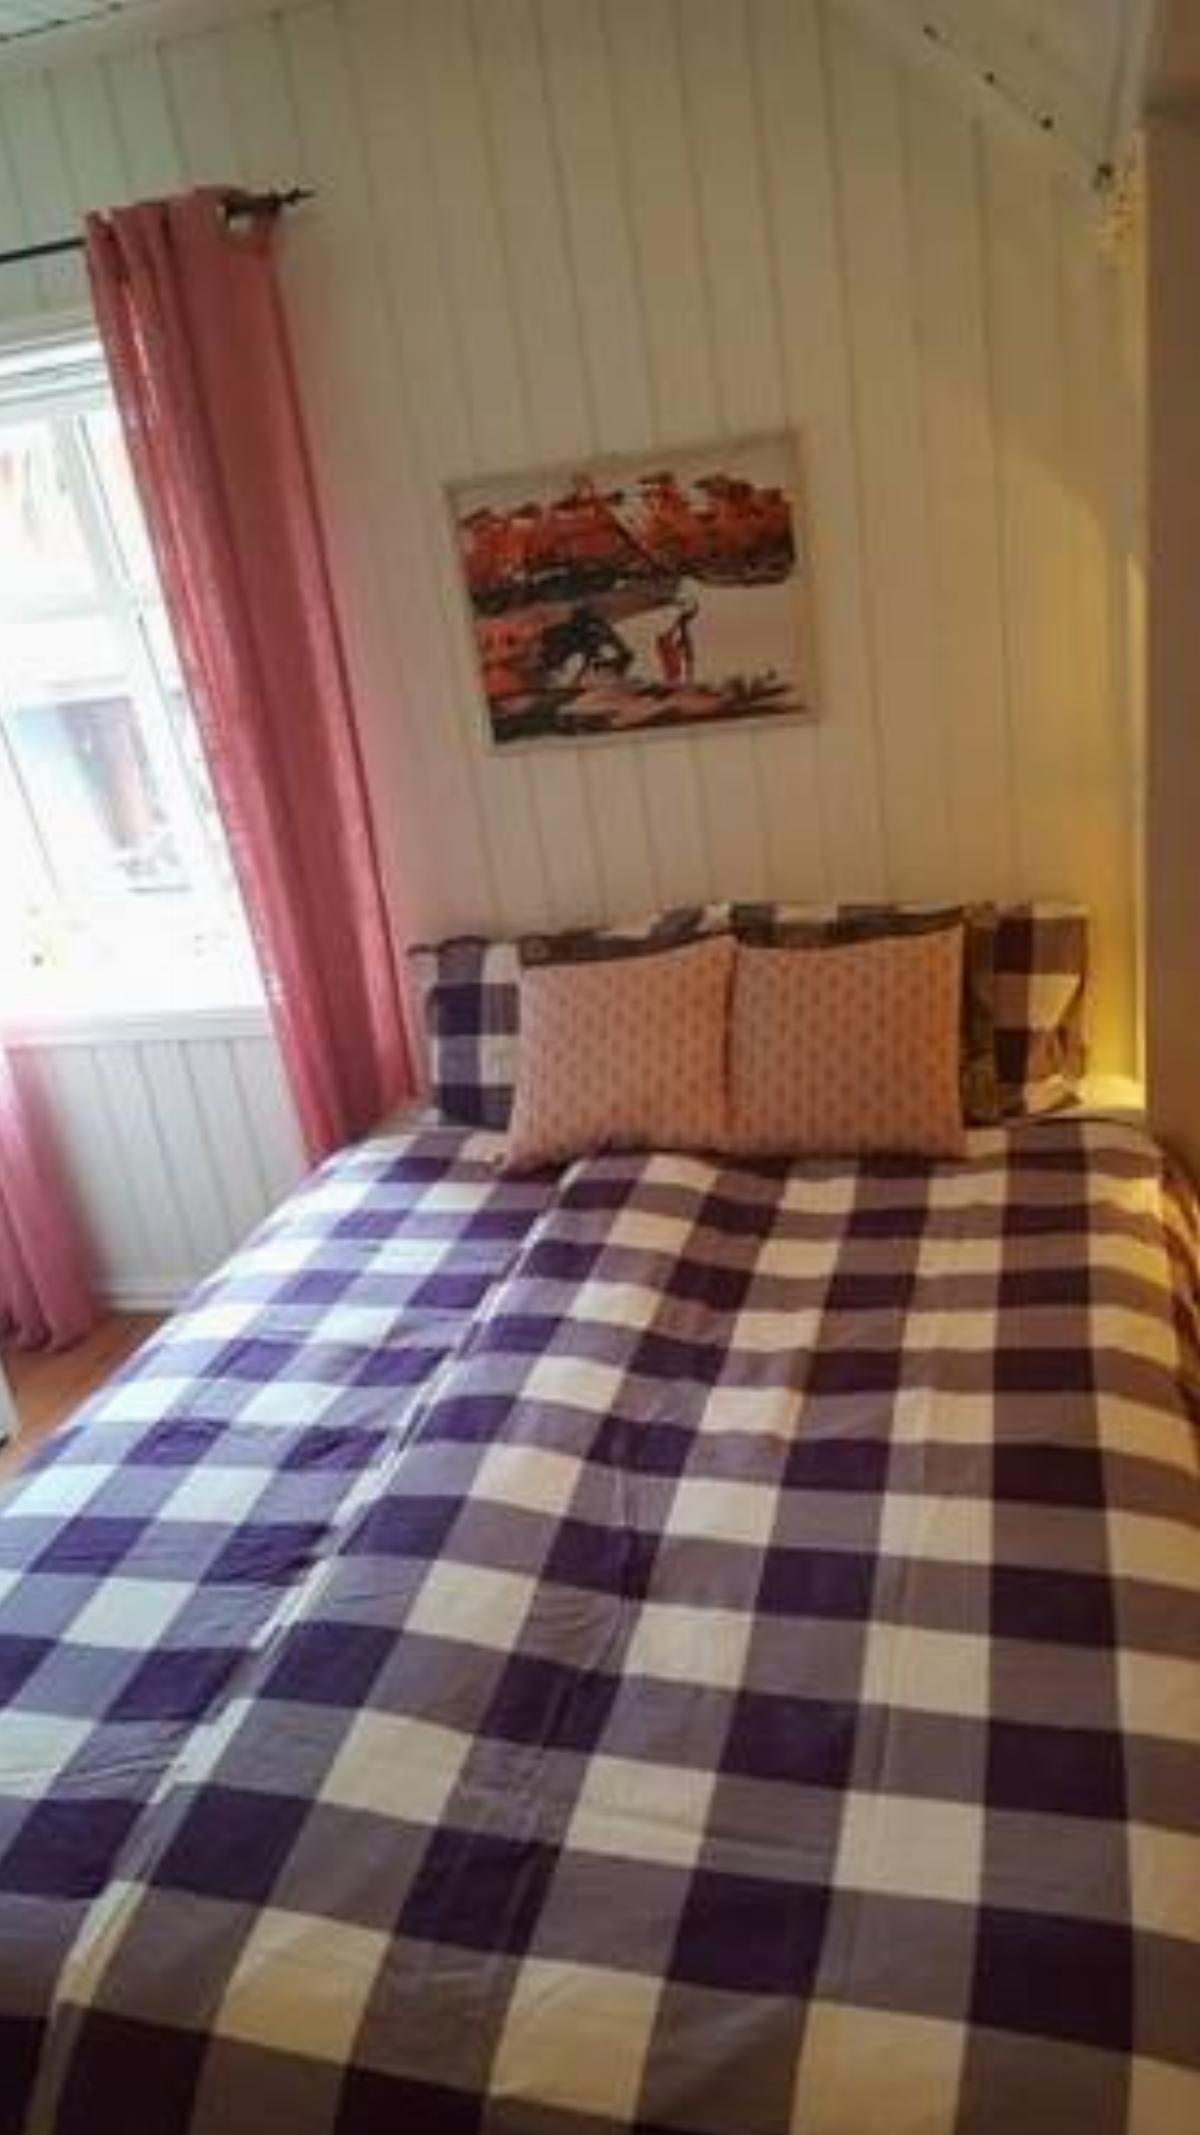 Egil's Vacation House Hotel Lillehammer Norway